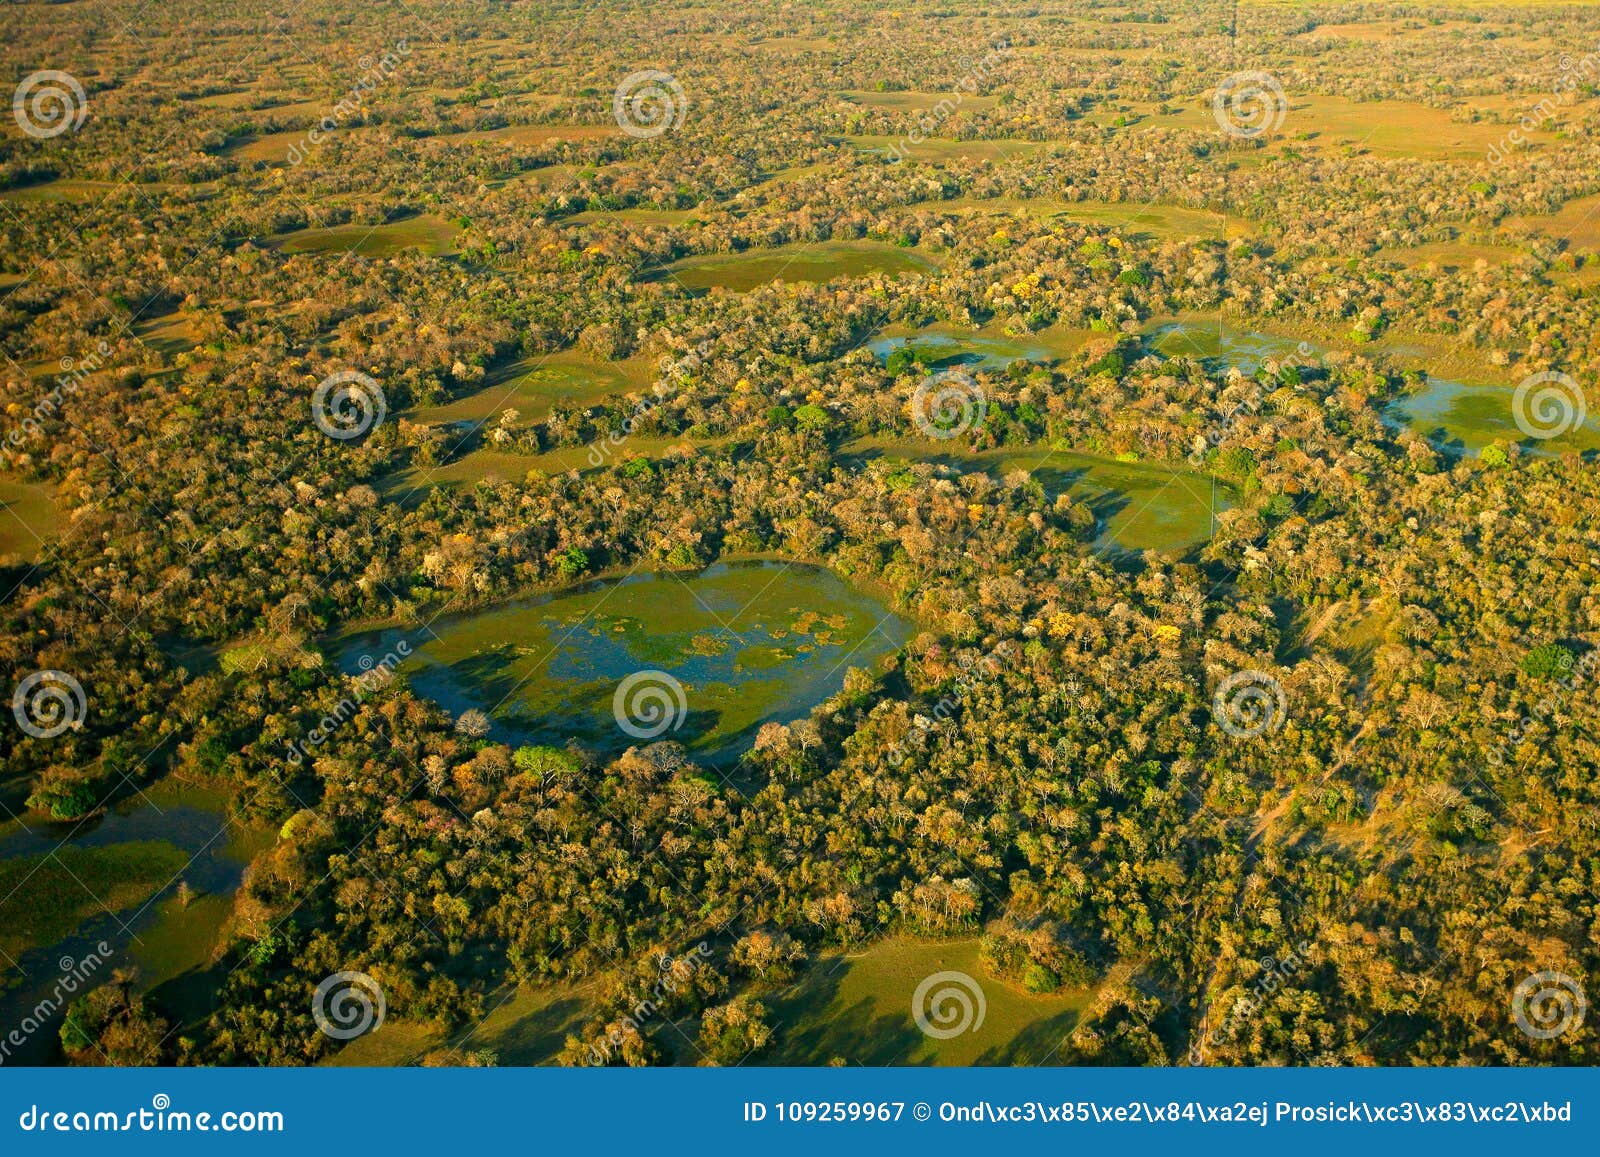 pantanal landscape, green lakes and small ponds with trees. aerial view on tropic forest, pantanal, brazil. wildlife nature, tropi